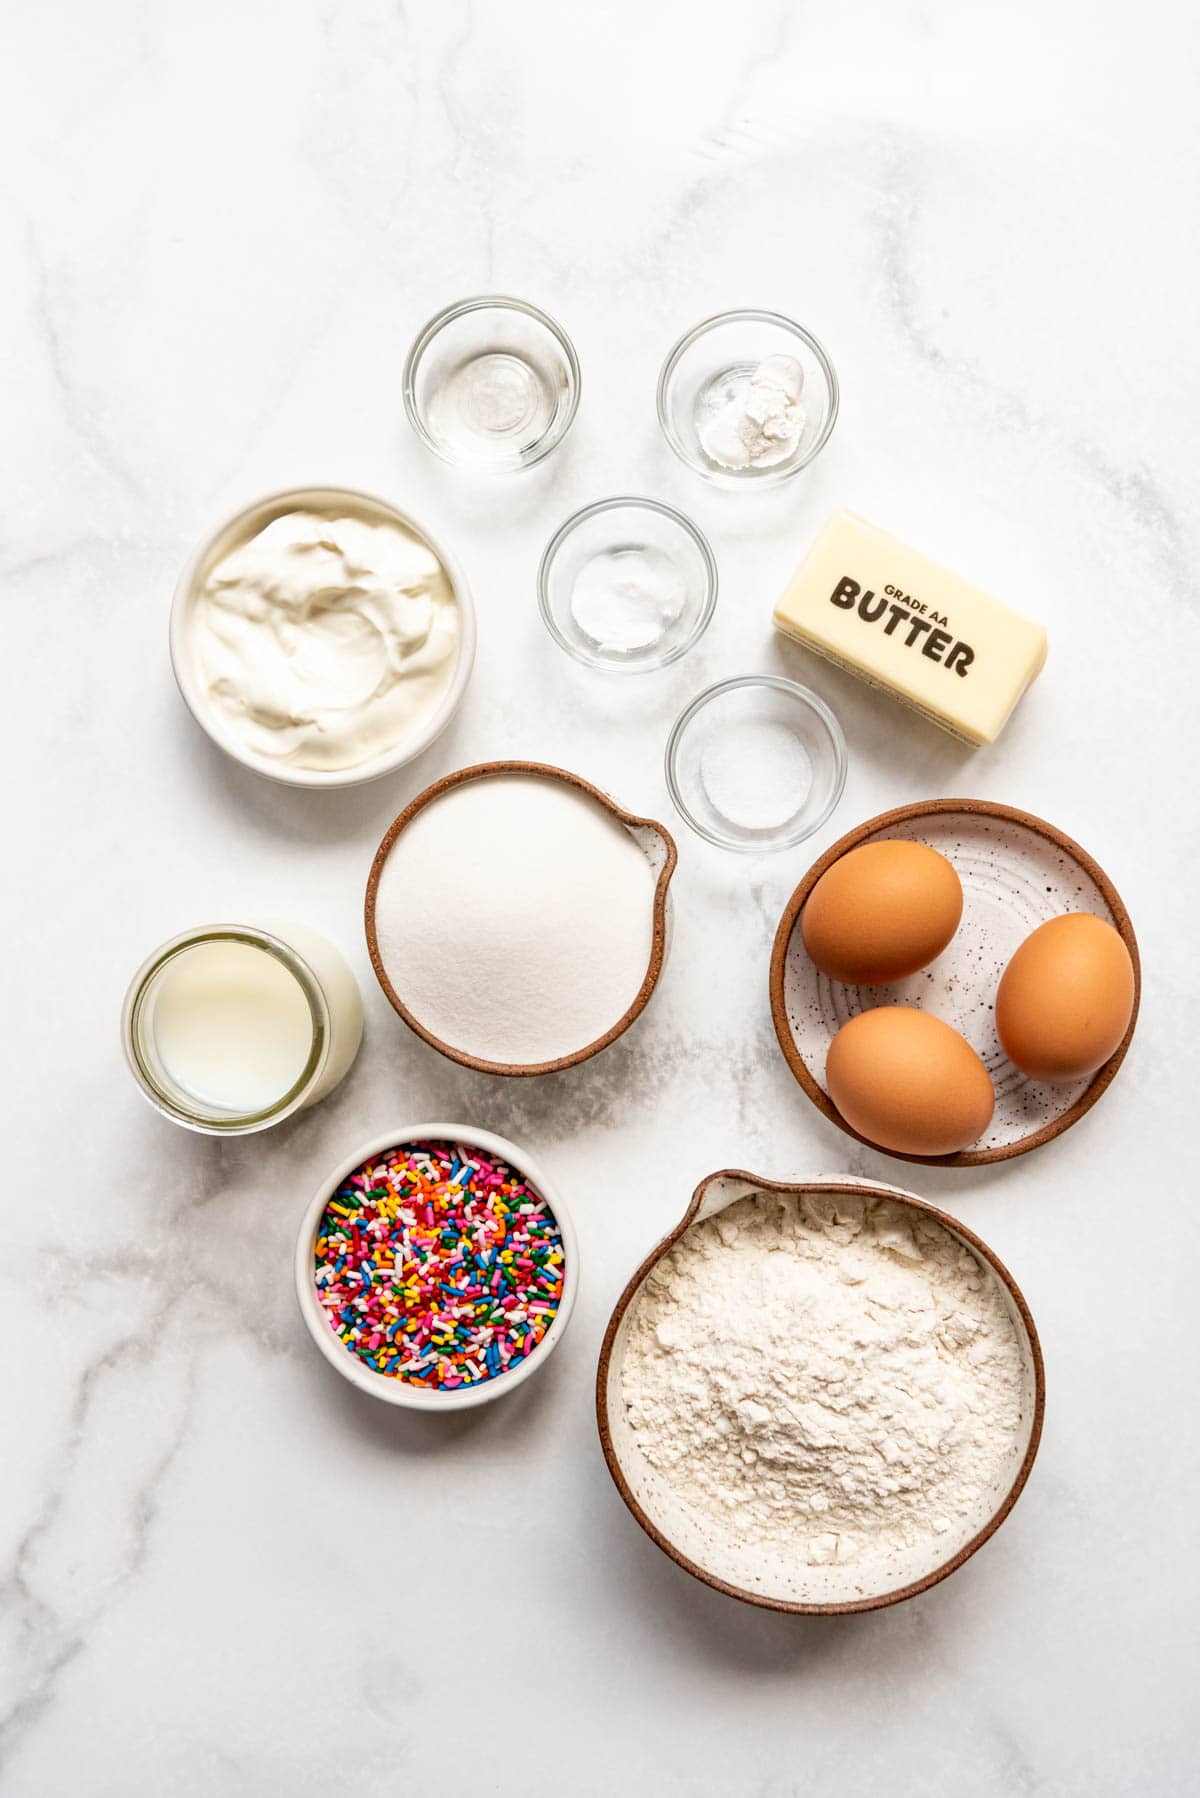 Ingredients for homemade funfetti cupcakes from scratch.